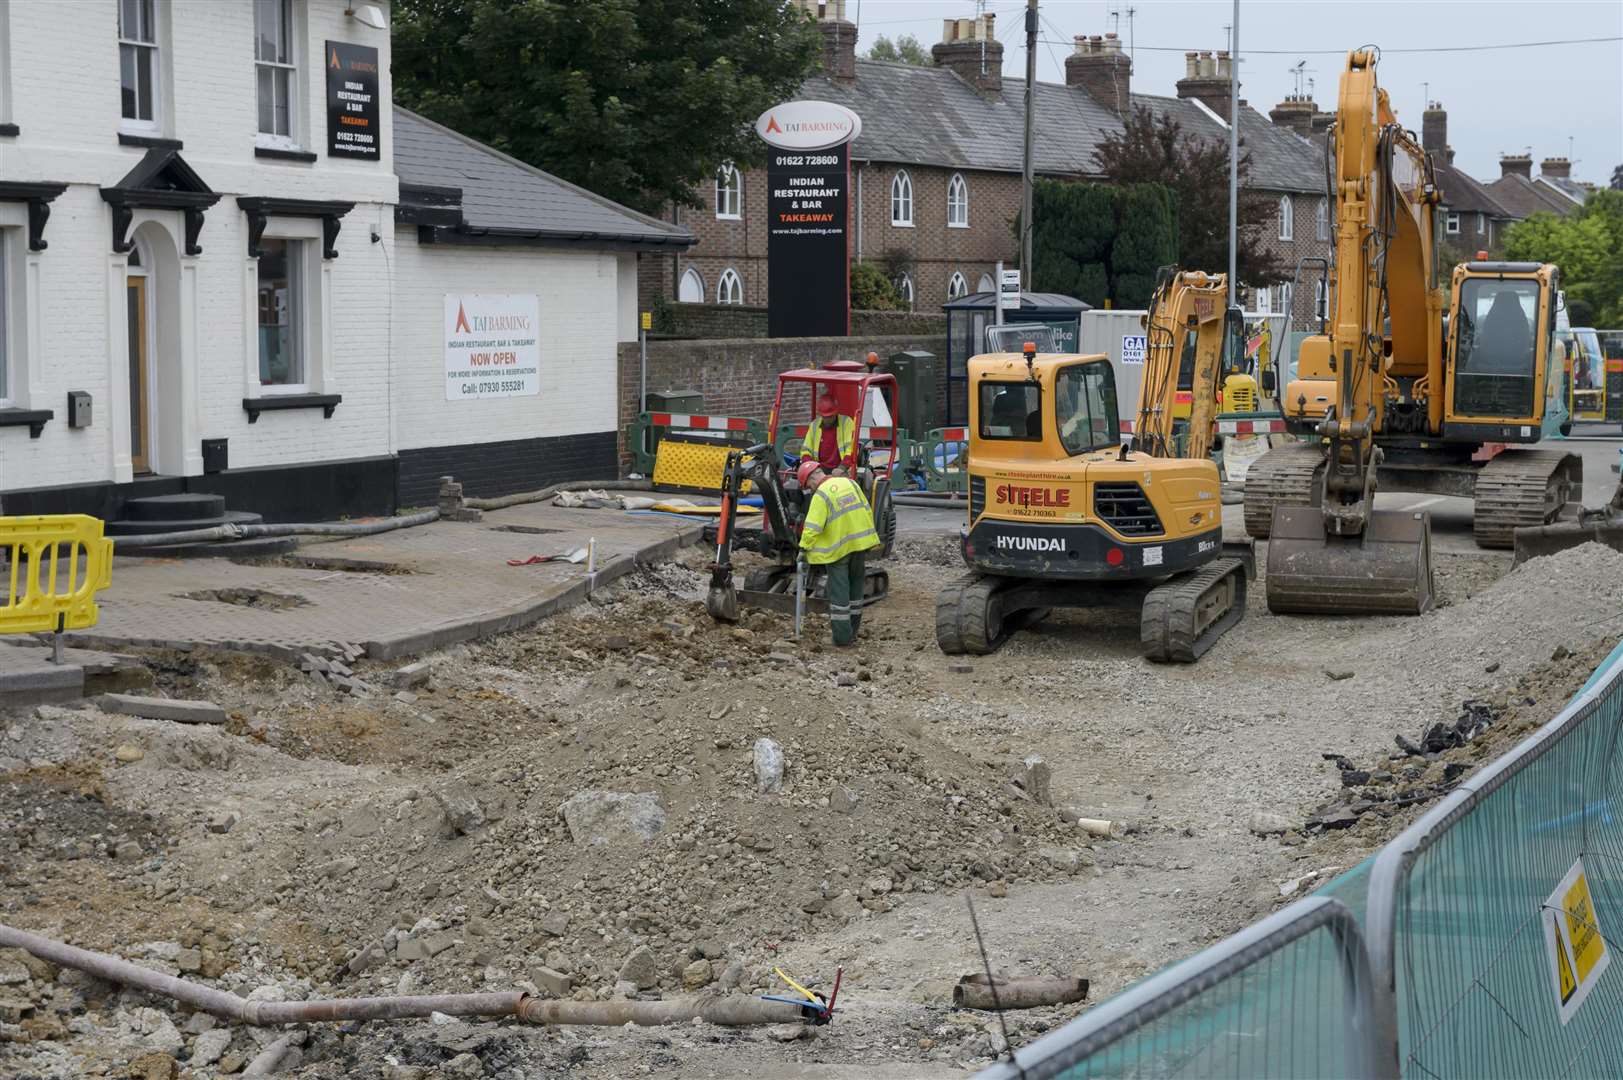 The sinkhole opened up on the A26 Tonbridge Road in Barming back in May